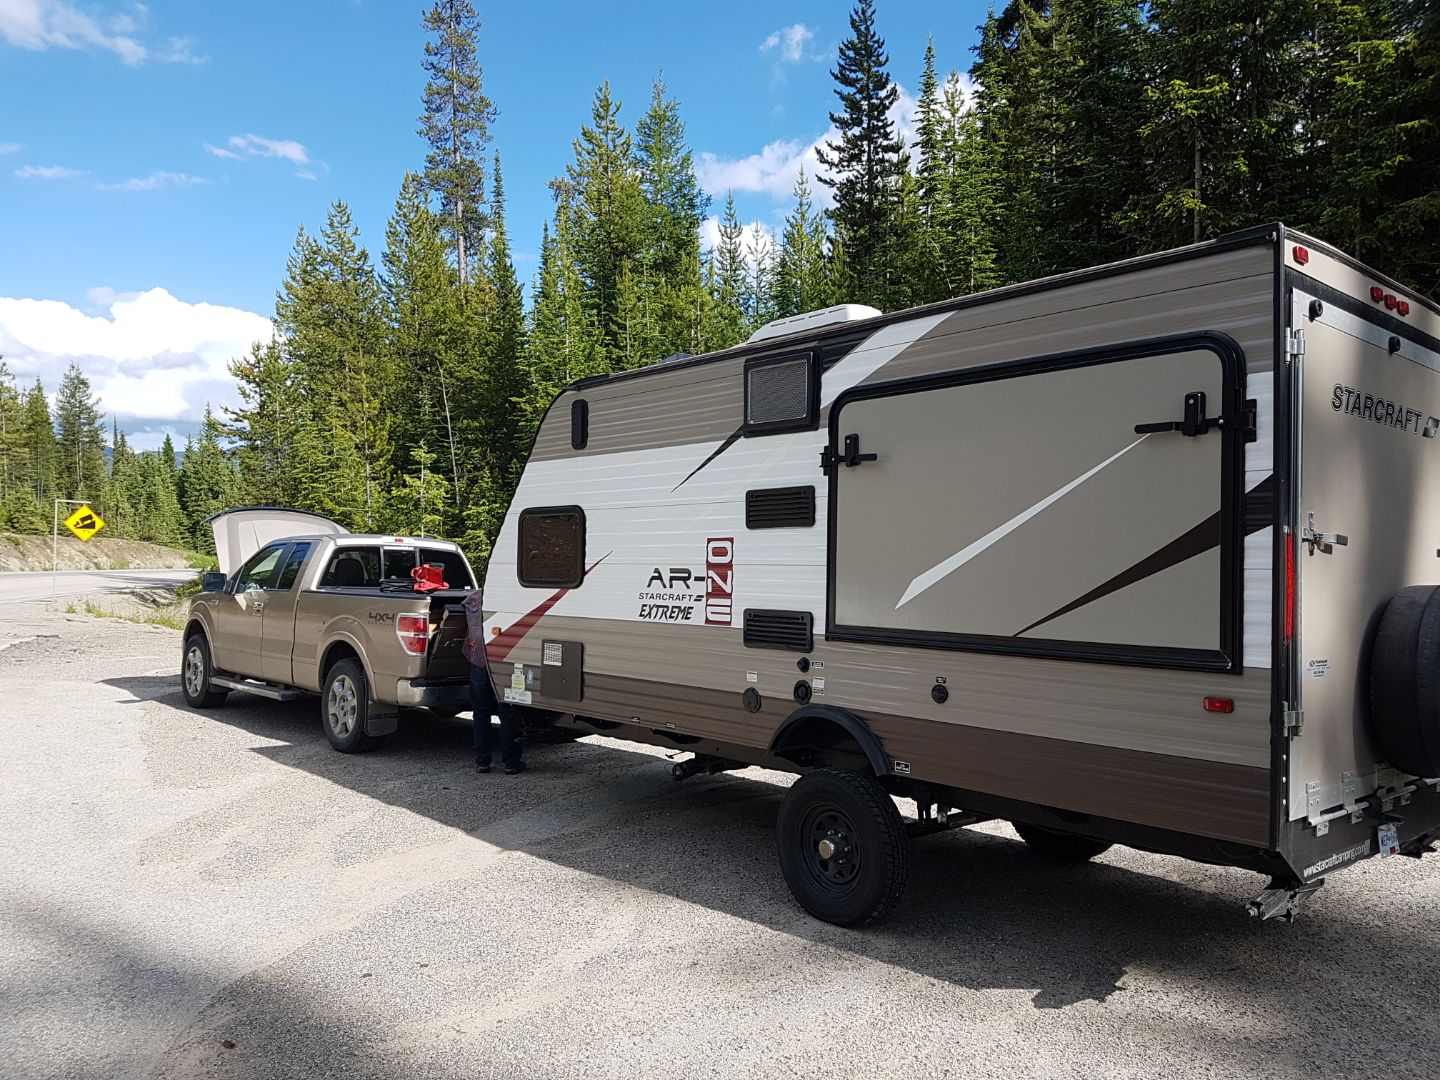 Travel trailer and motorcycle stolen